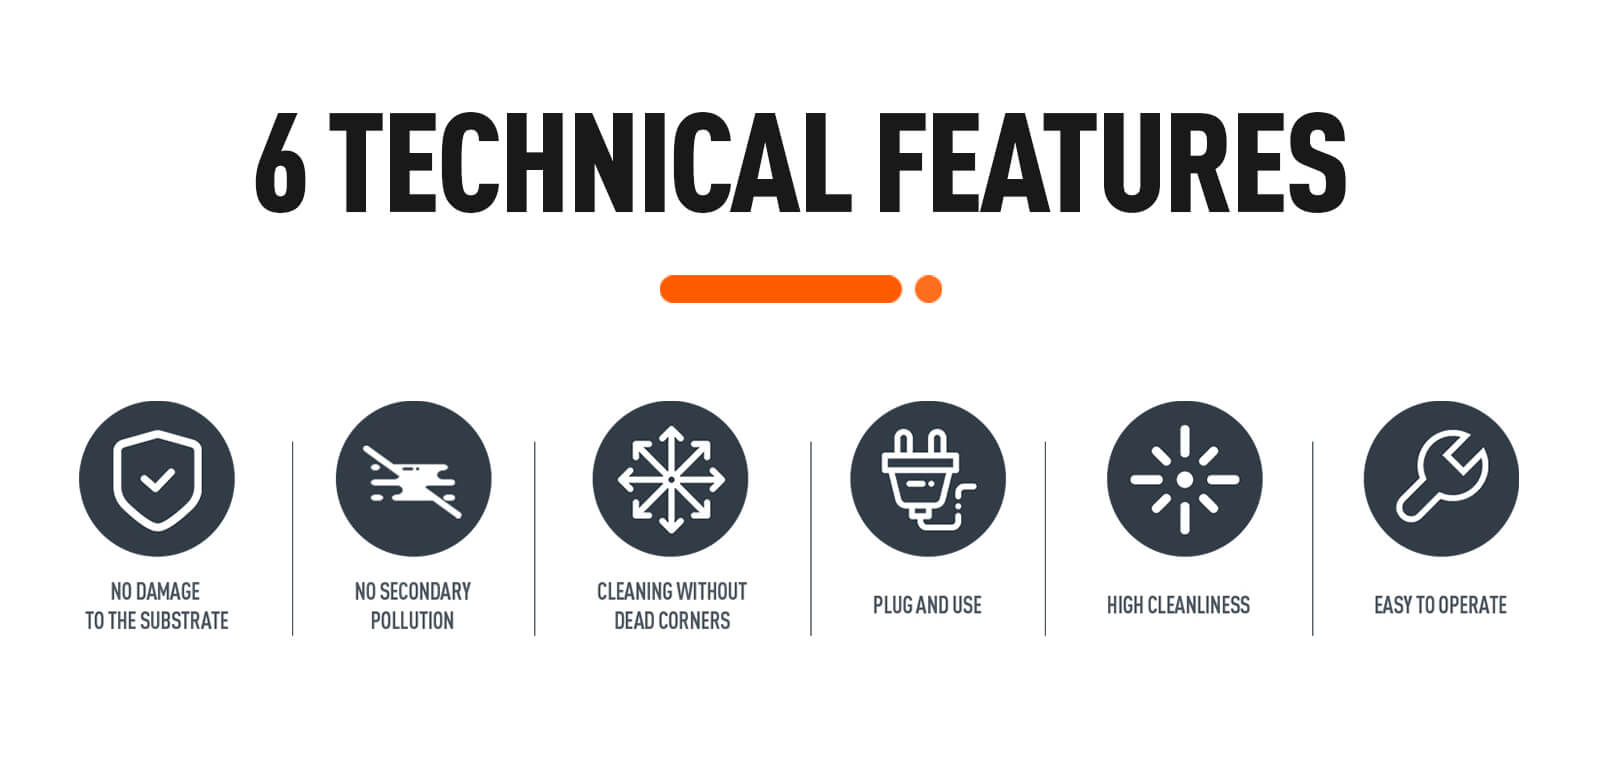 lasercleaning-6 technical features